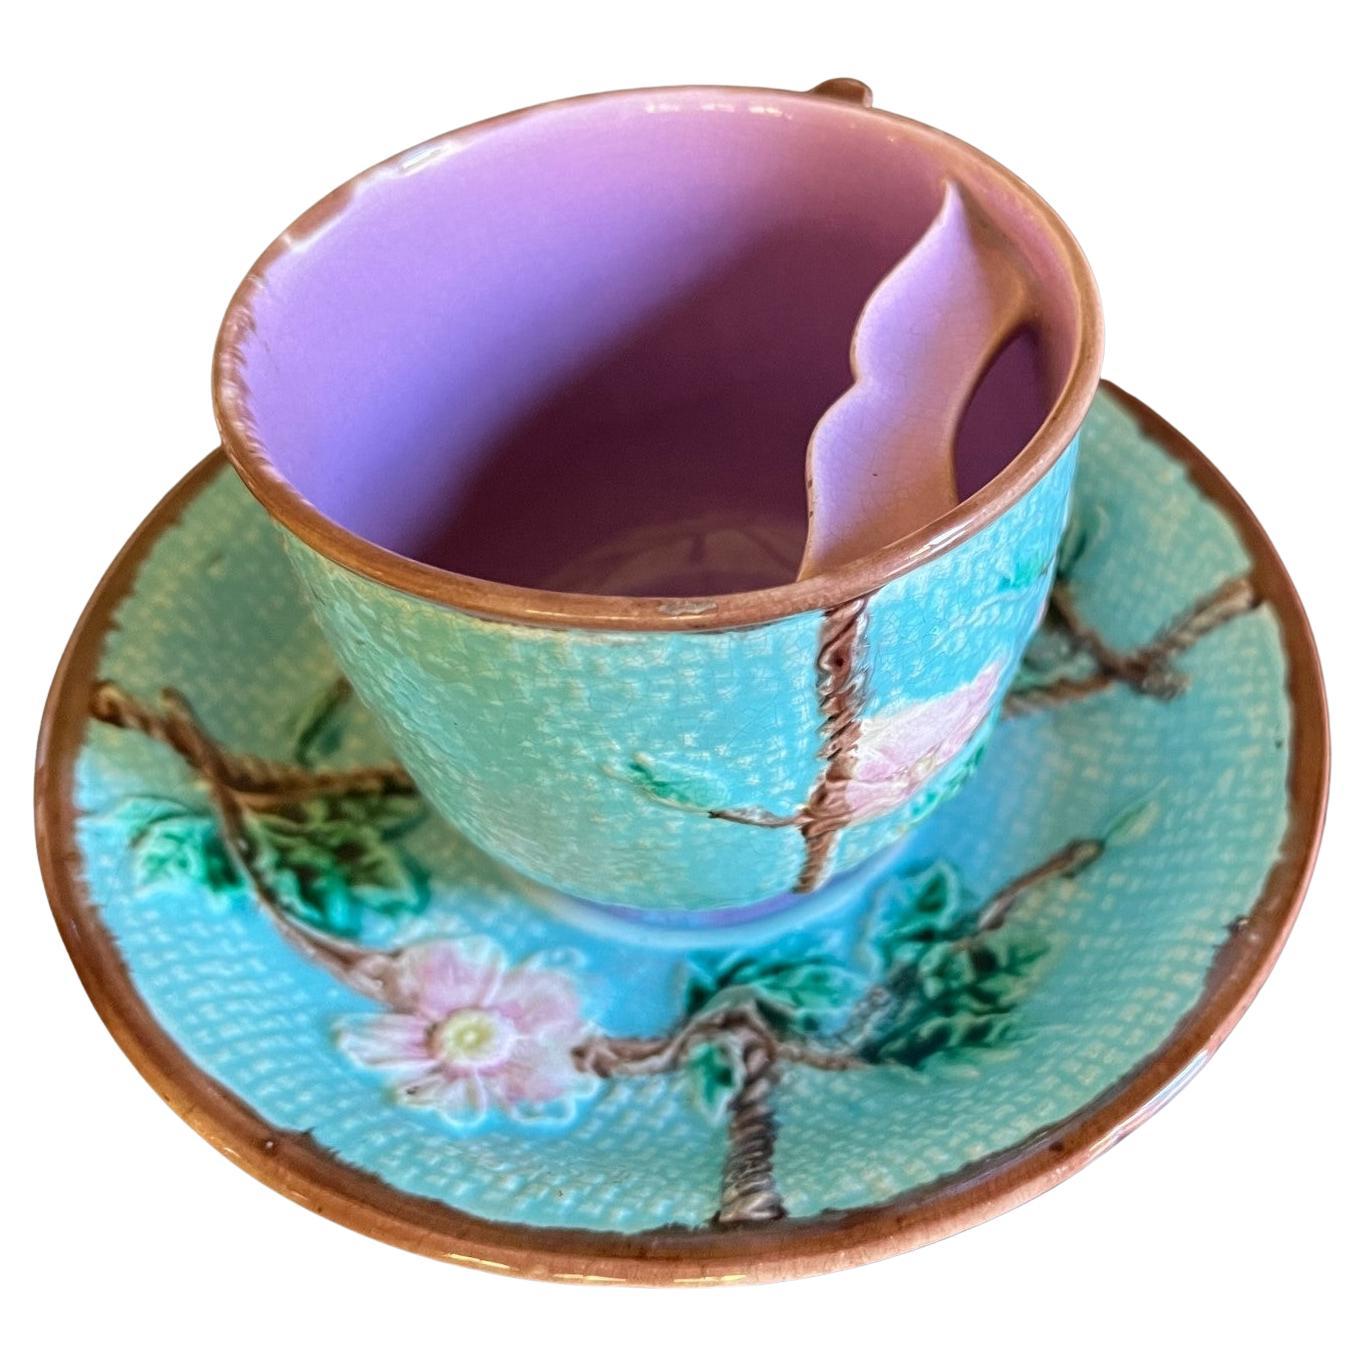 Antique English Majolica Mustache Cup and Saucer, C. 1890